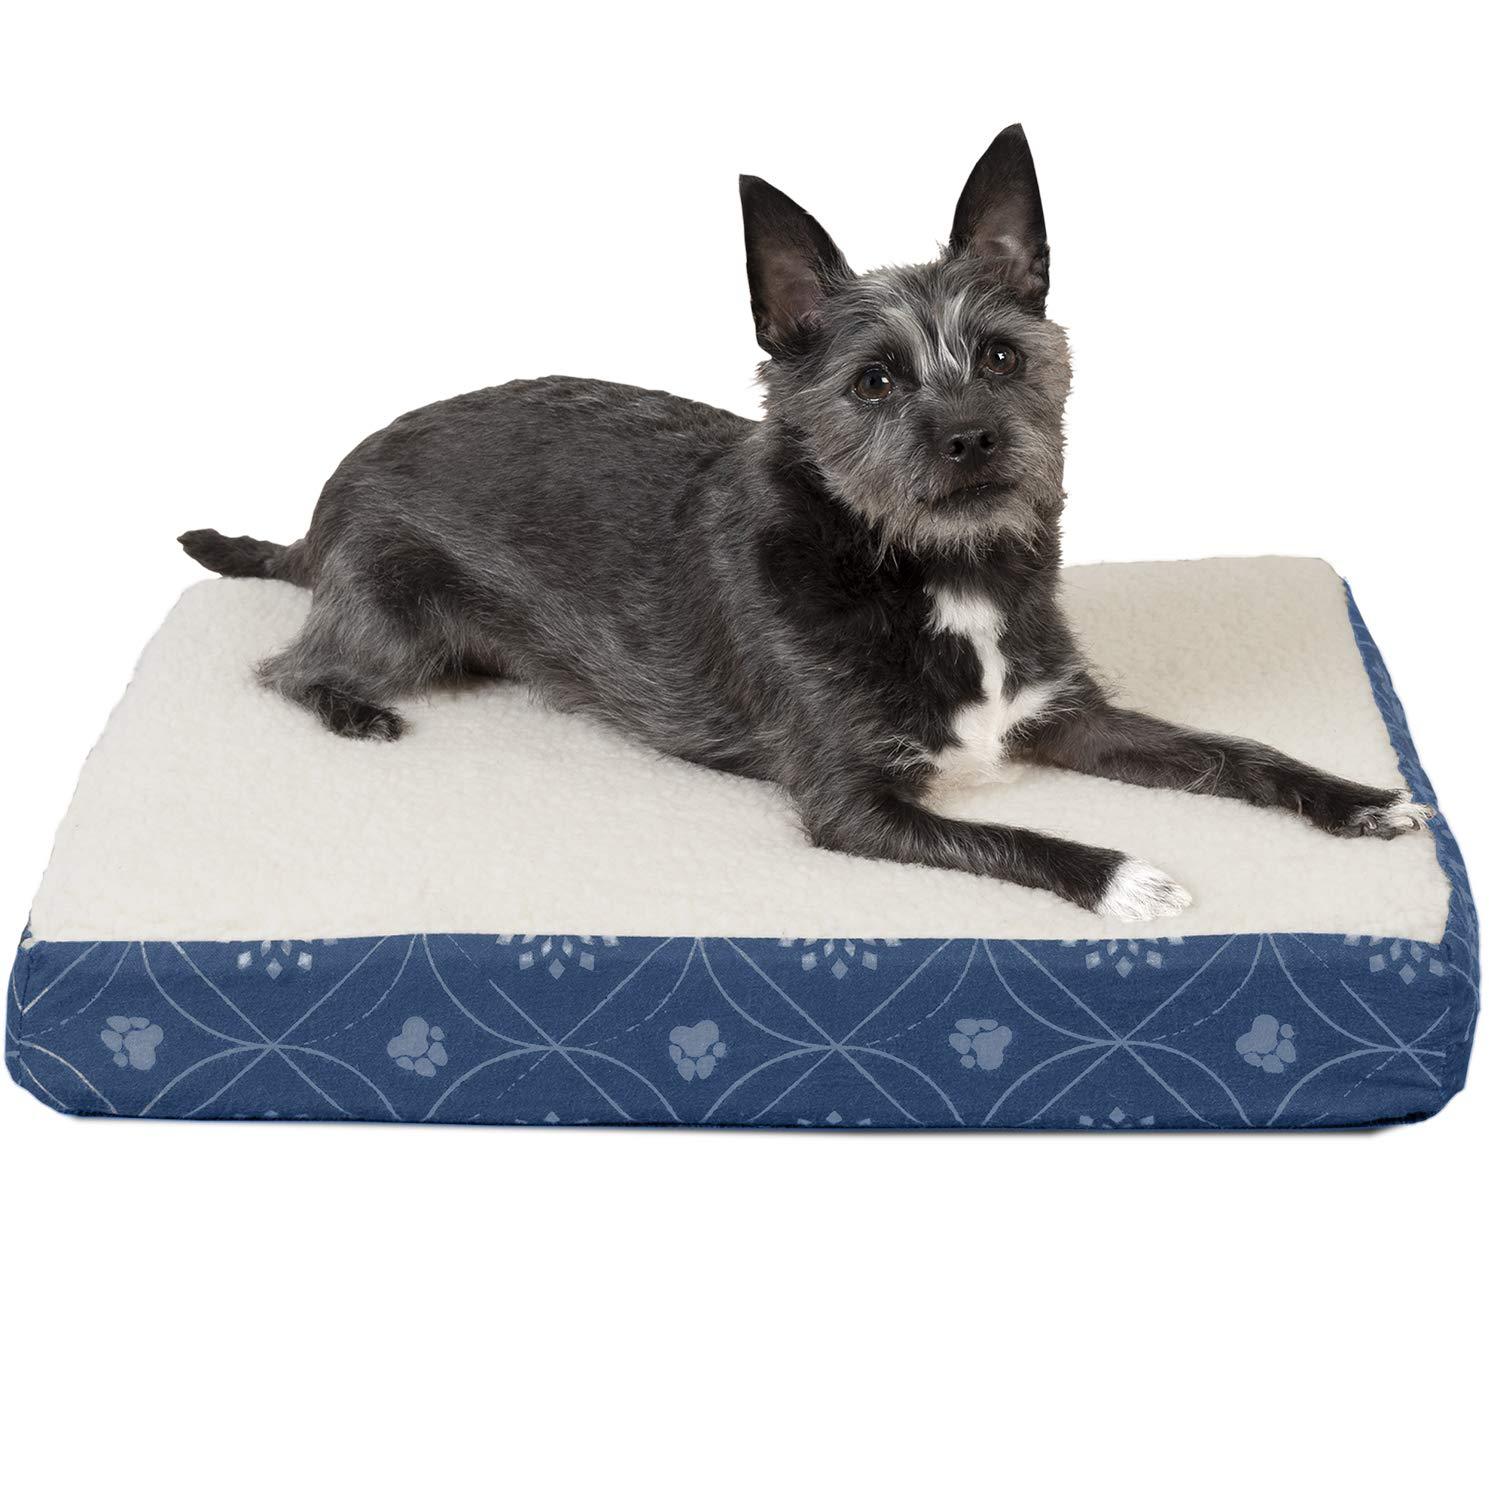 FurHaven Paw Decor Deluxe Orthopedic Pet Bed - Twilight Blue